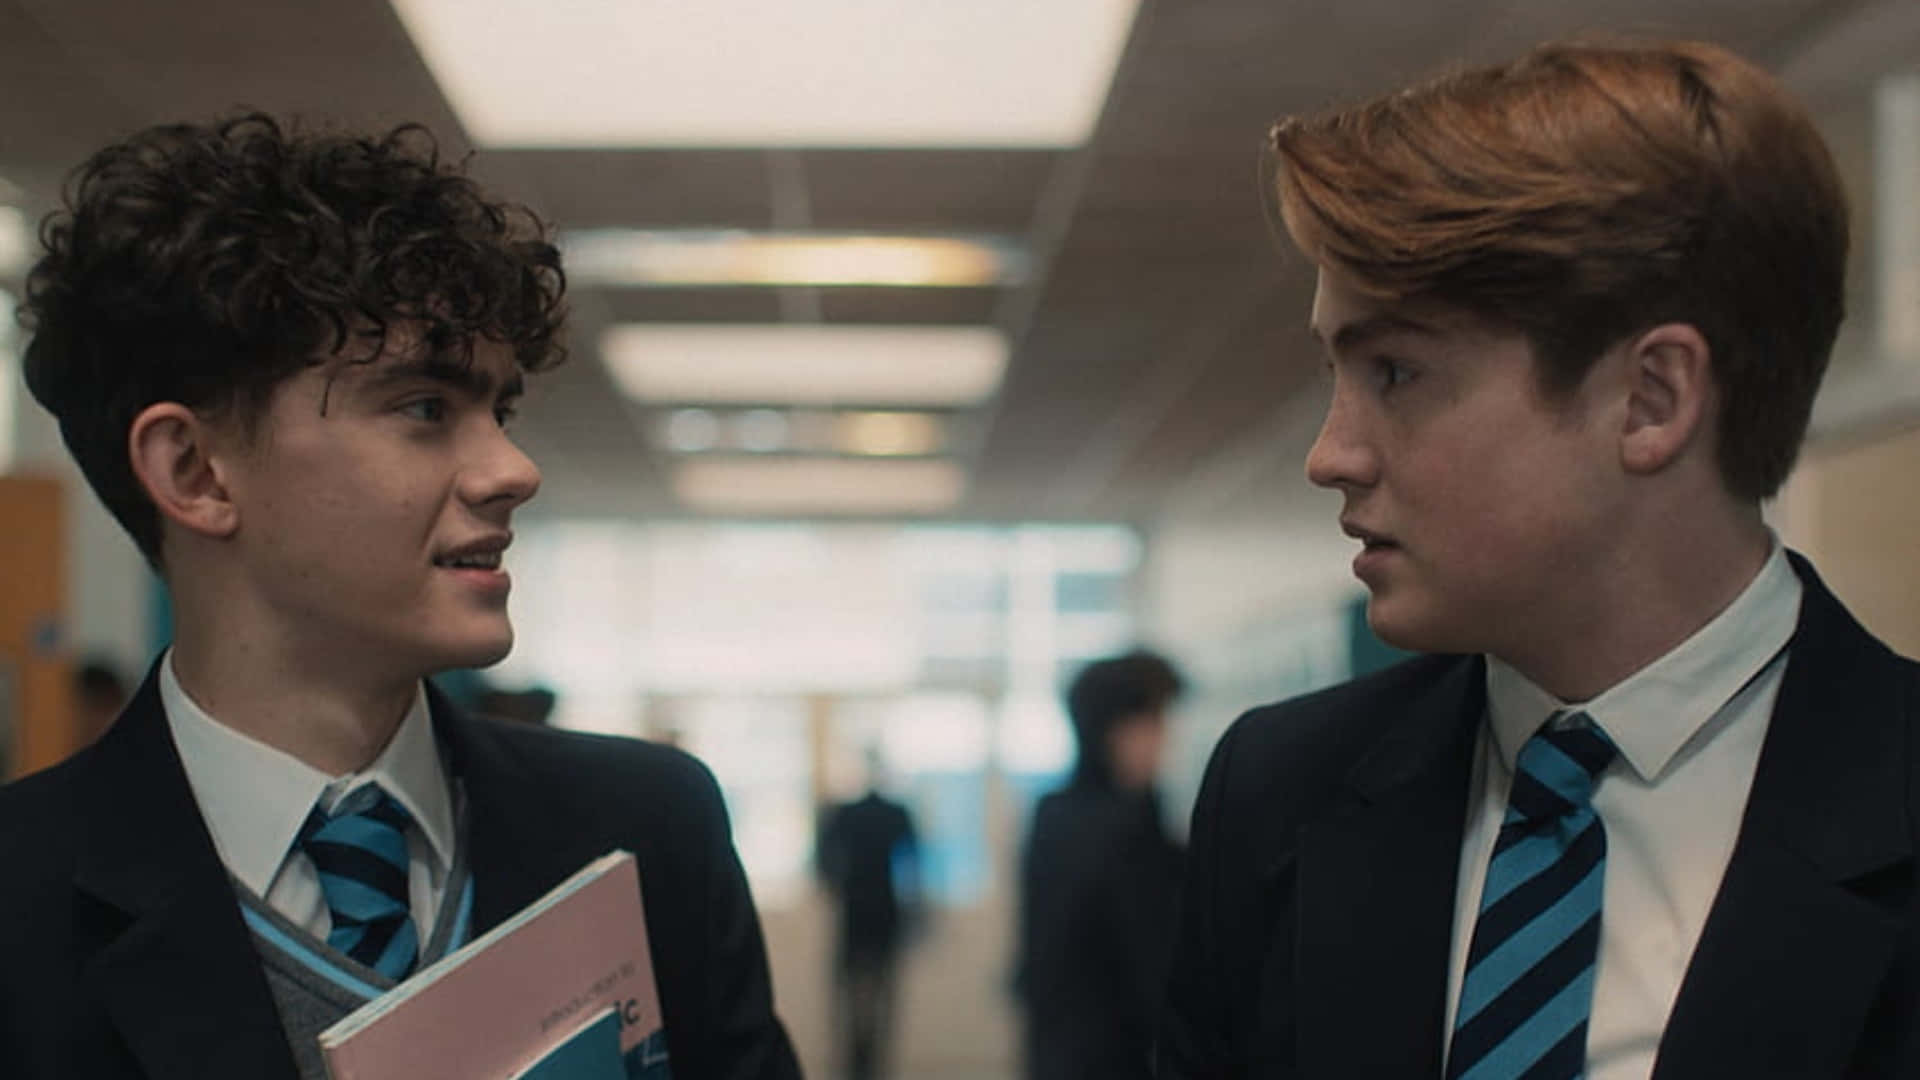 Two Boys In School Uniforms Talking To Each Other